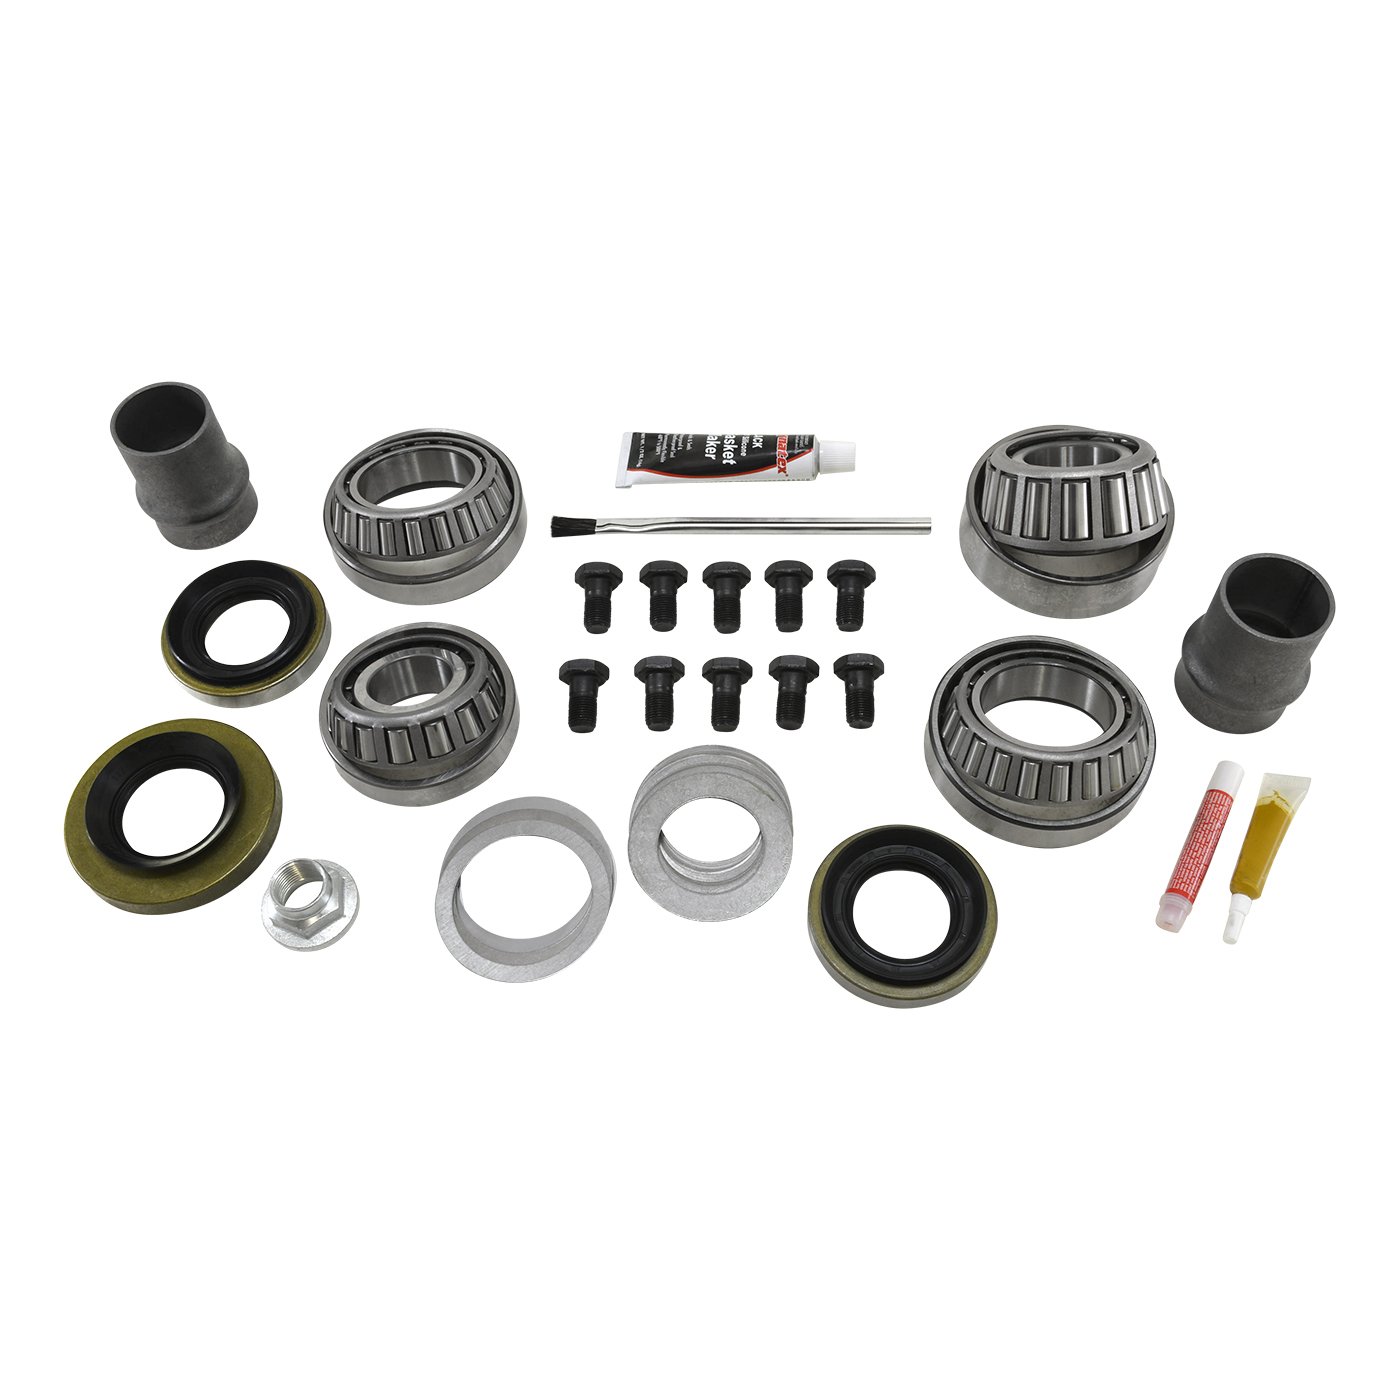 Master Overhaul Kit For Toyota 7.5 in. Ifs Differential, V6